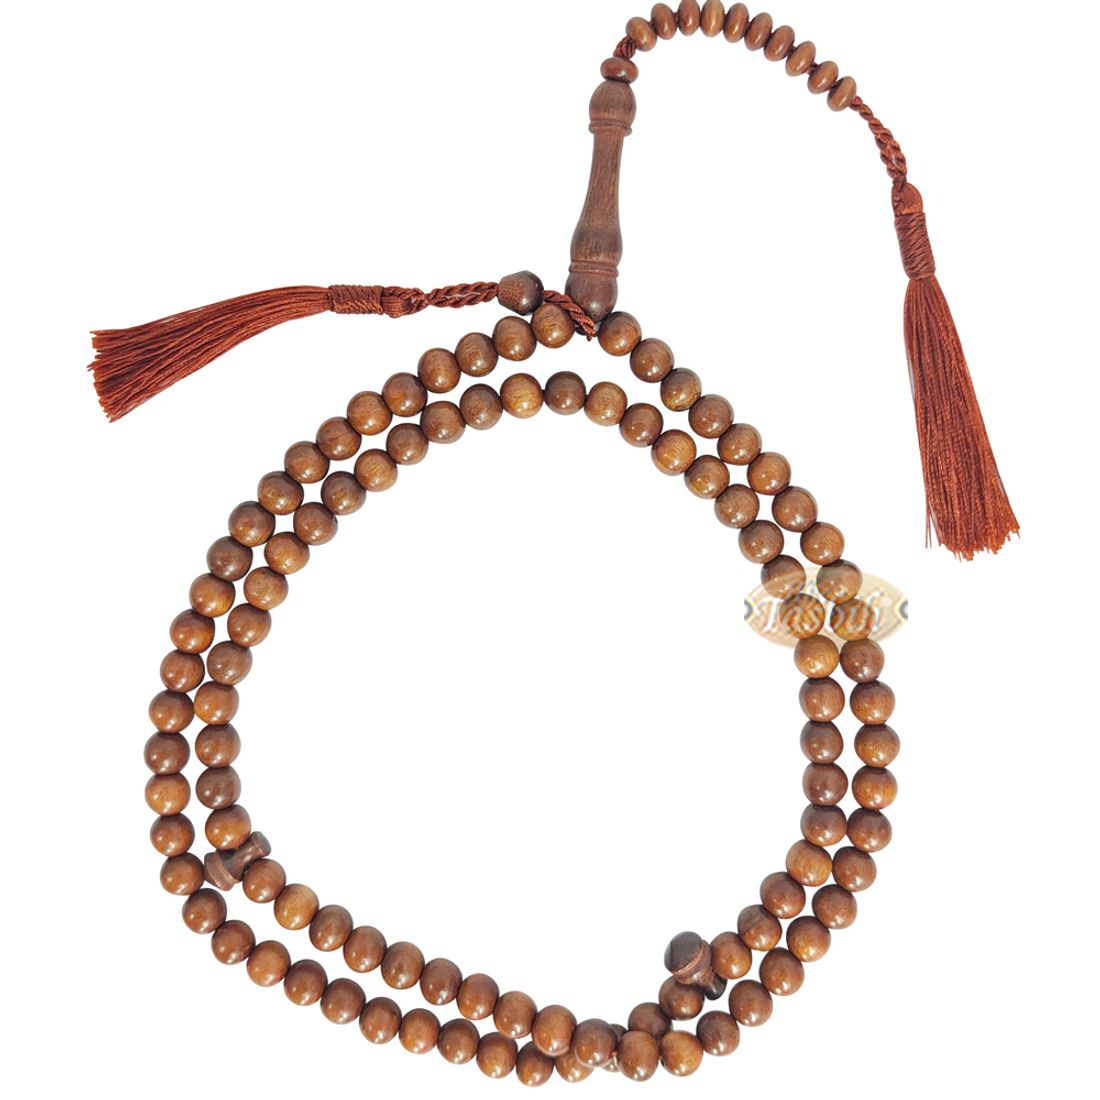 Naturally-Dyed Ironwood 8mm Tasbih Prayer Beads 99-Bead with Matching Brown Tassels